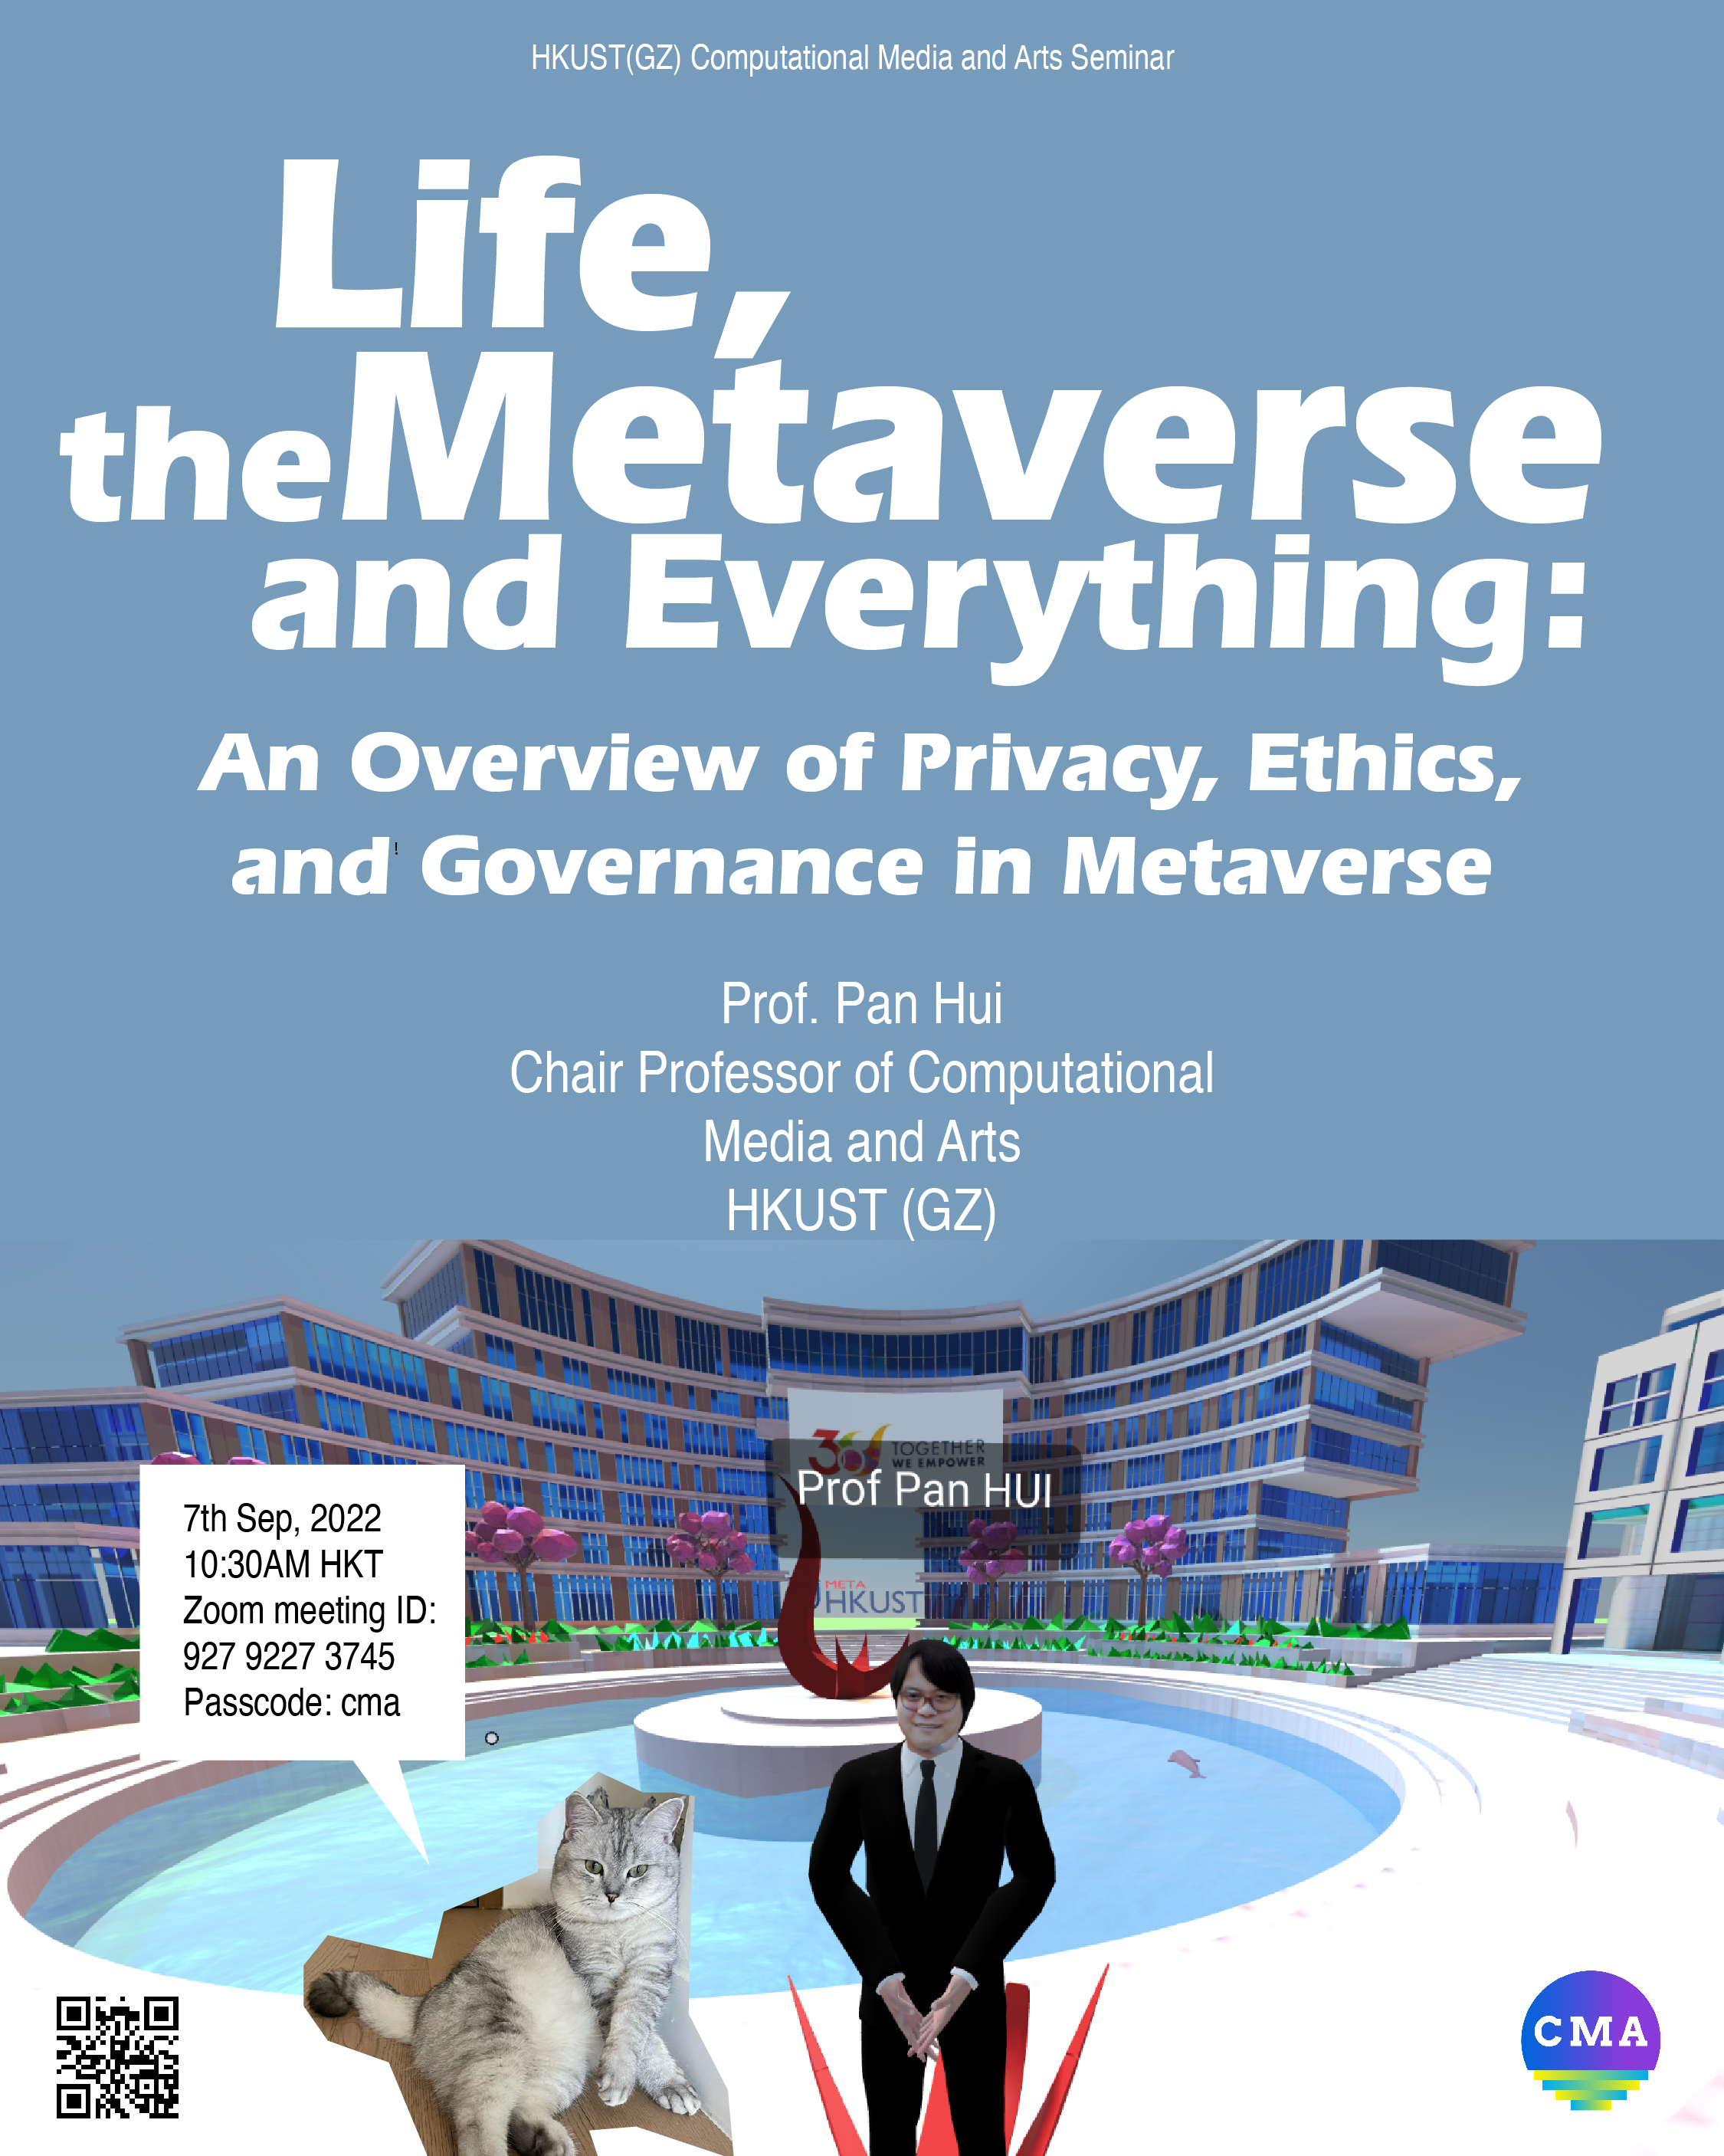 Seminar - Life, the Metaverse and Everything: An Overview of Privacy, Ethics, and Governance in Metaverse